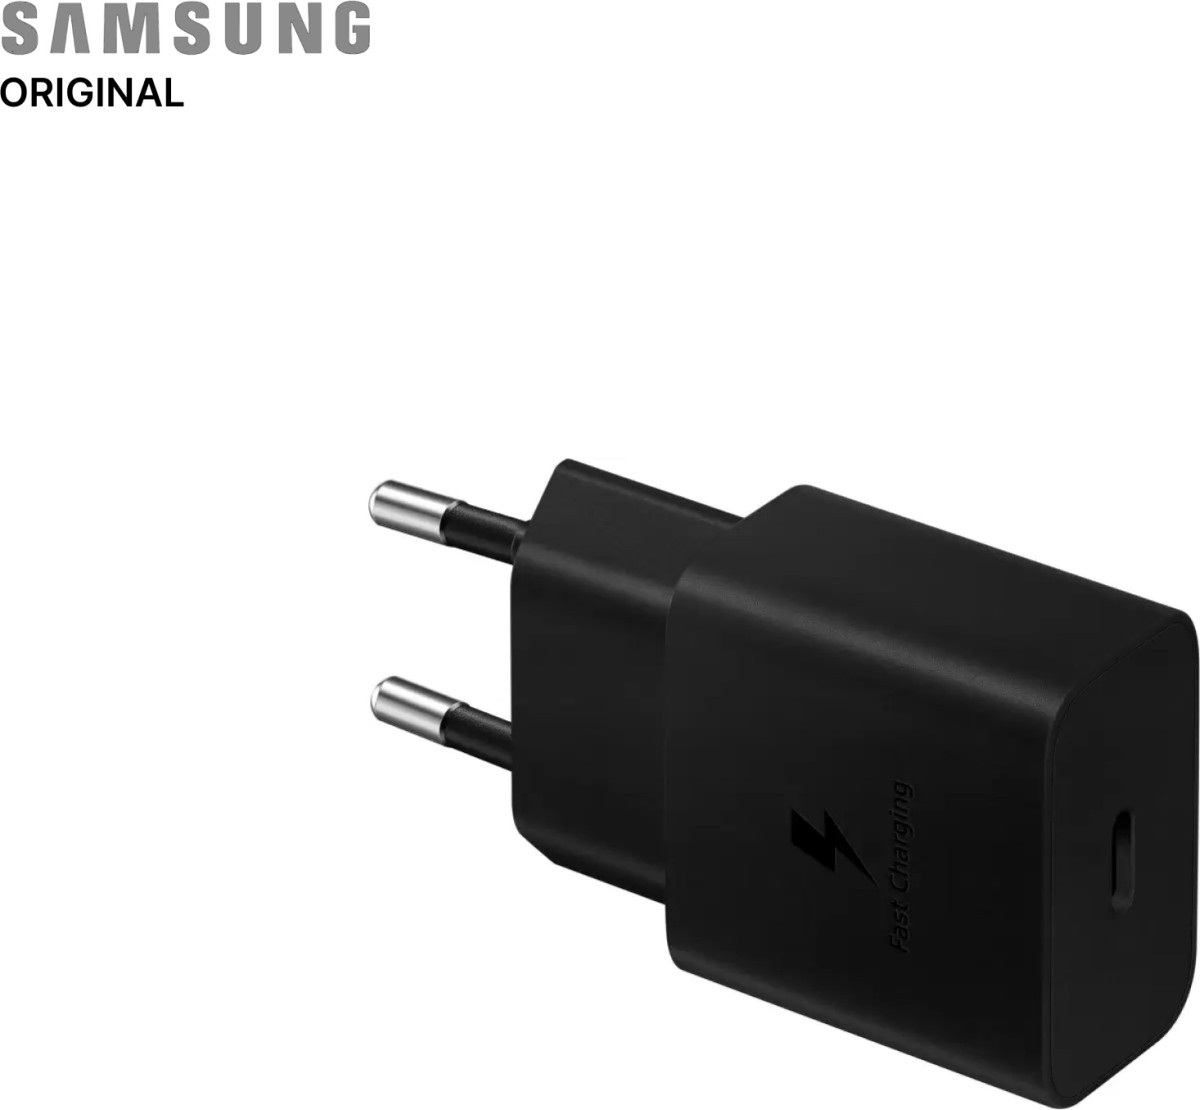 Samsung Chargers Under ₹3,000